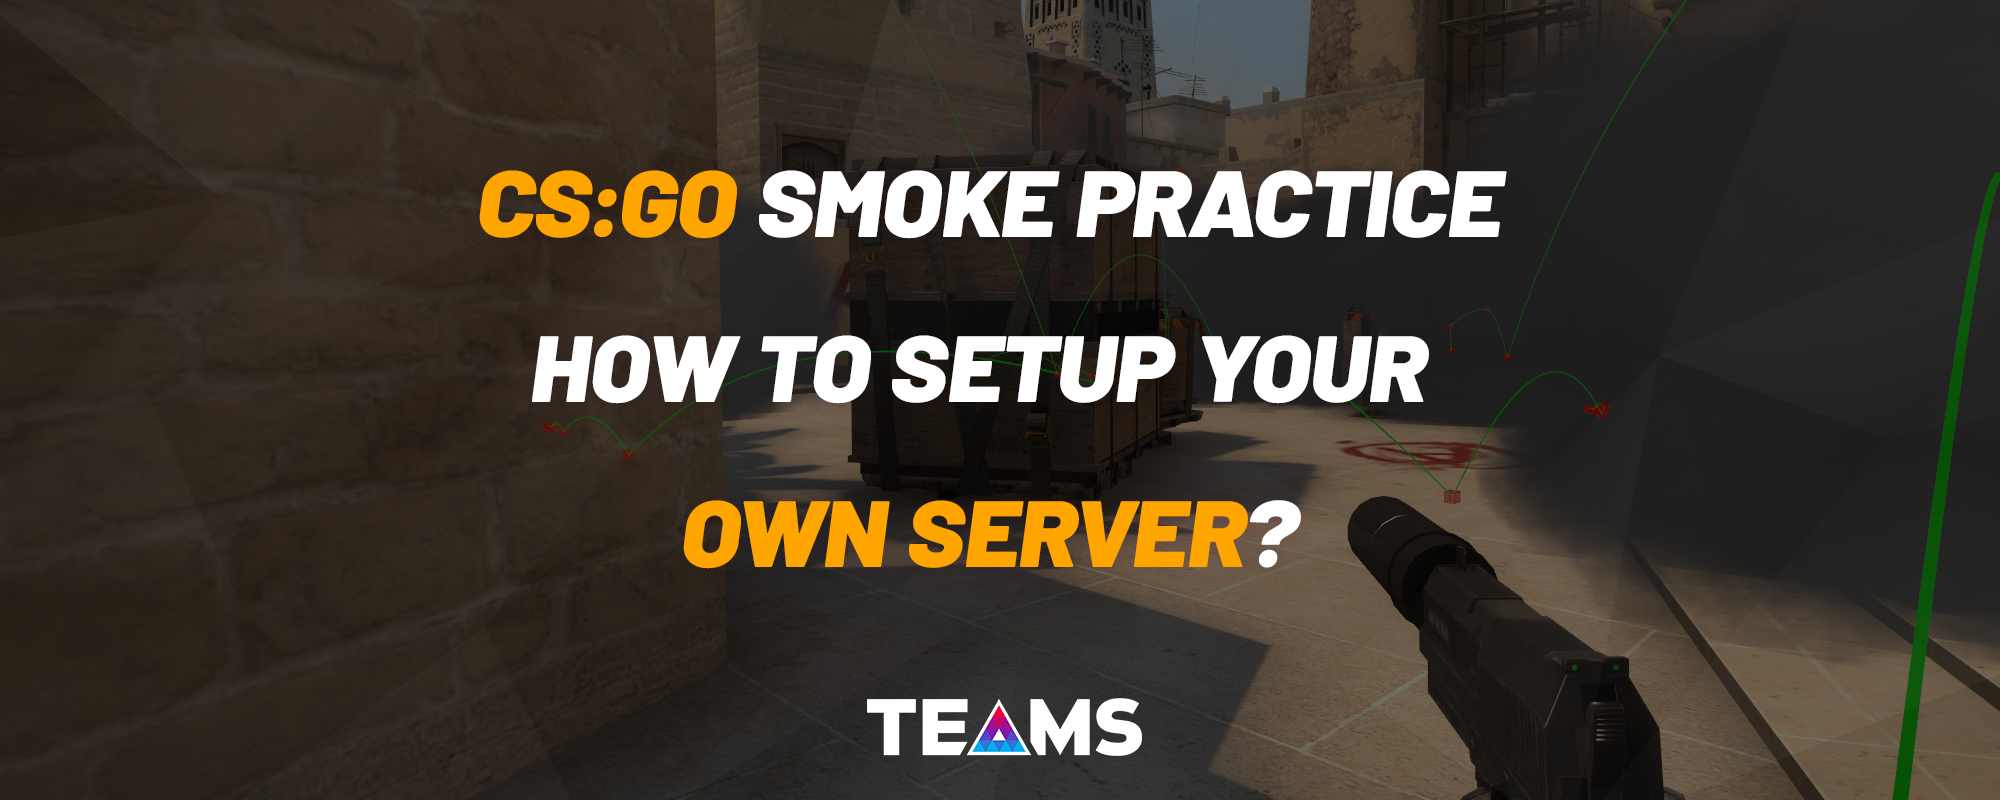 How to setup a server for smoke grenade practice in CS:GO 🥎